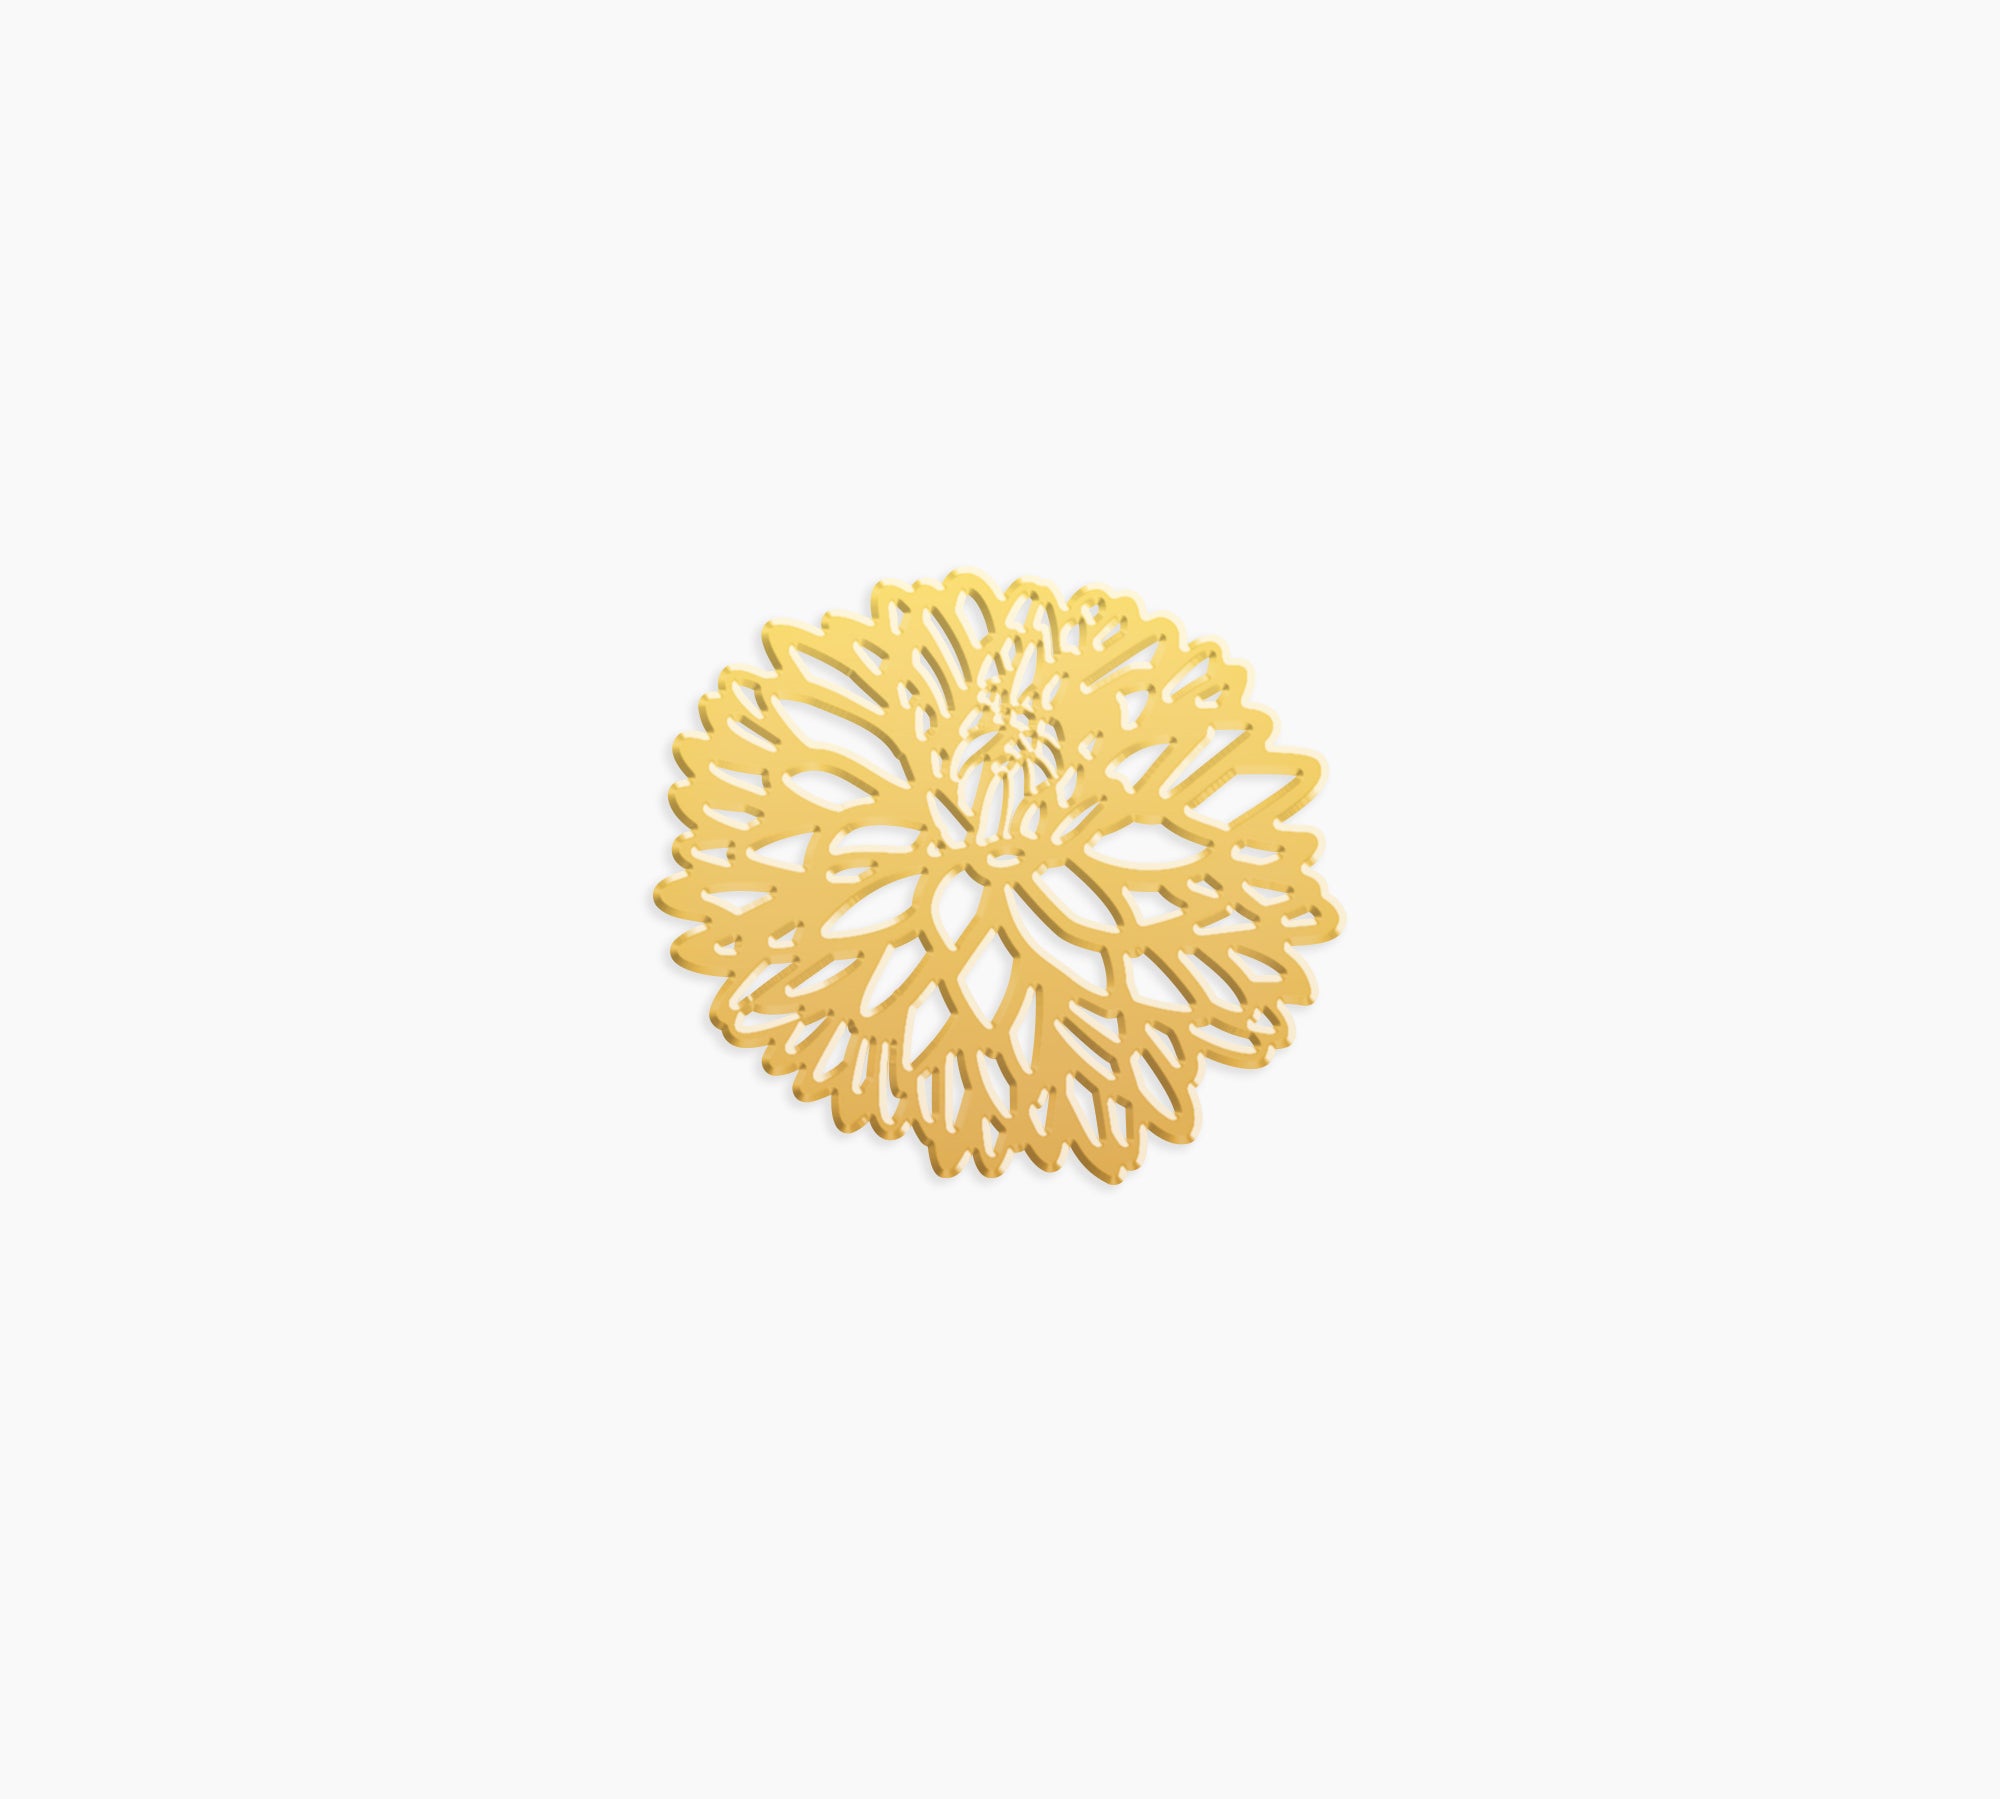 Chrysanthemum Charm - High Quality, Affordable, Whimsical, Hand Drawn Individual Charms for a Custom Locket - November Birthday Gift - Available in Gold and Silver - Made in USA - Brevity Jewelry